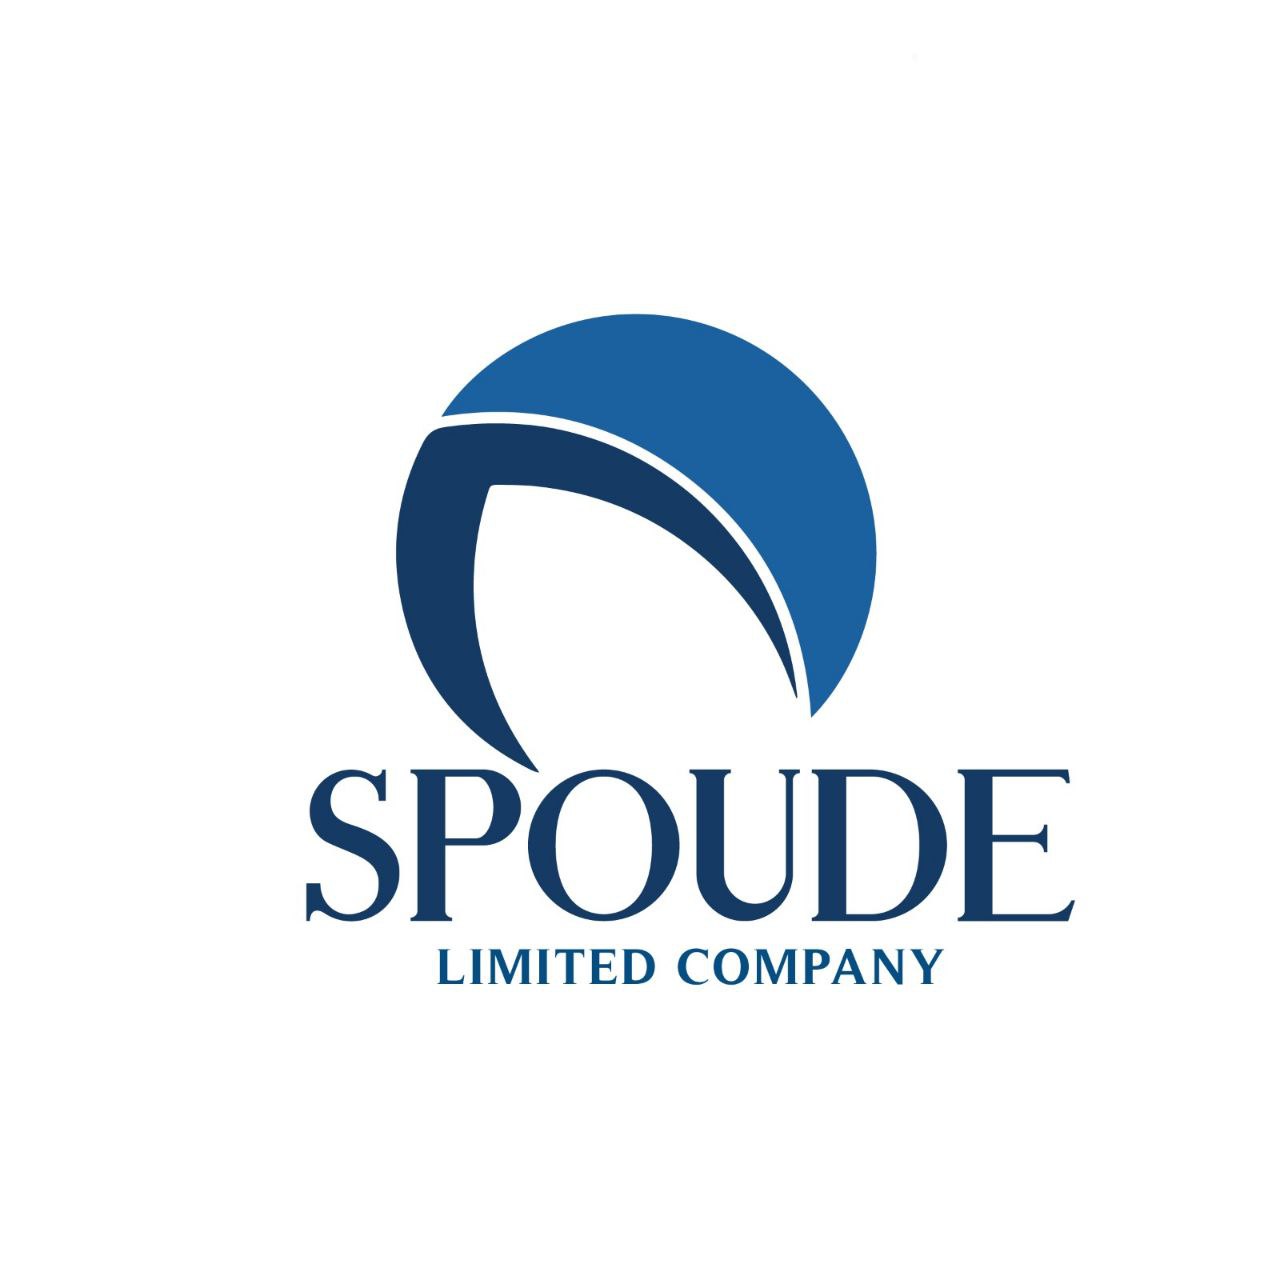 Spoude Limited Company